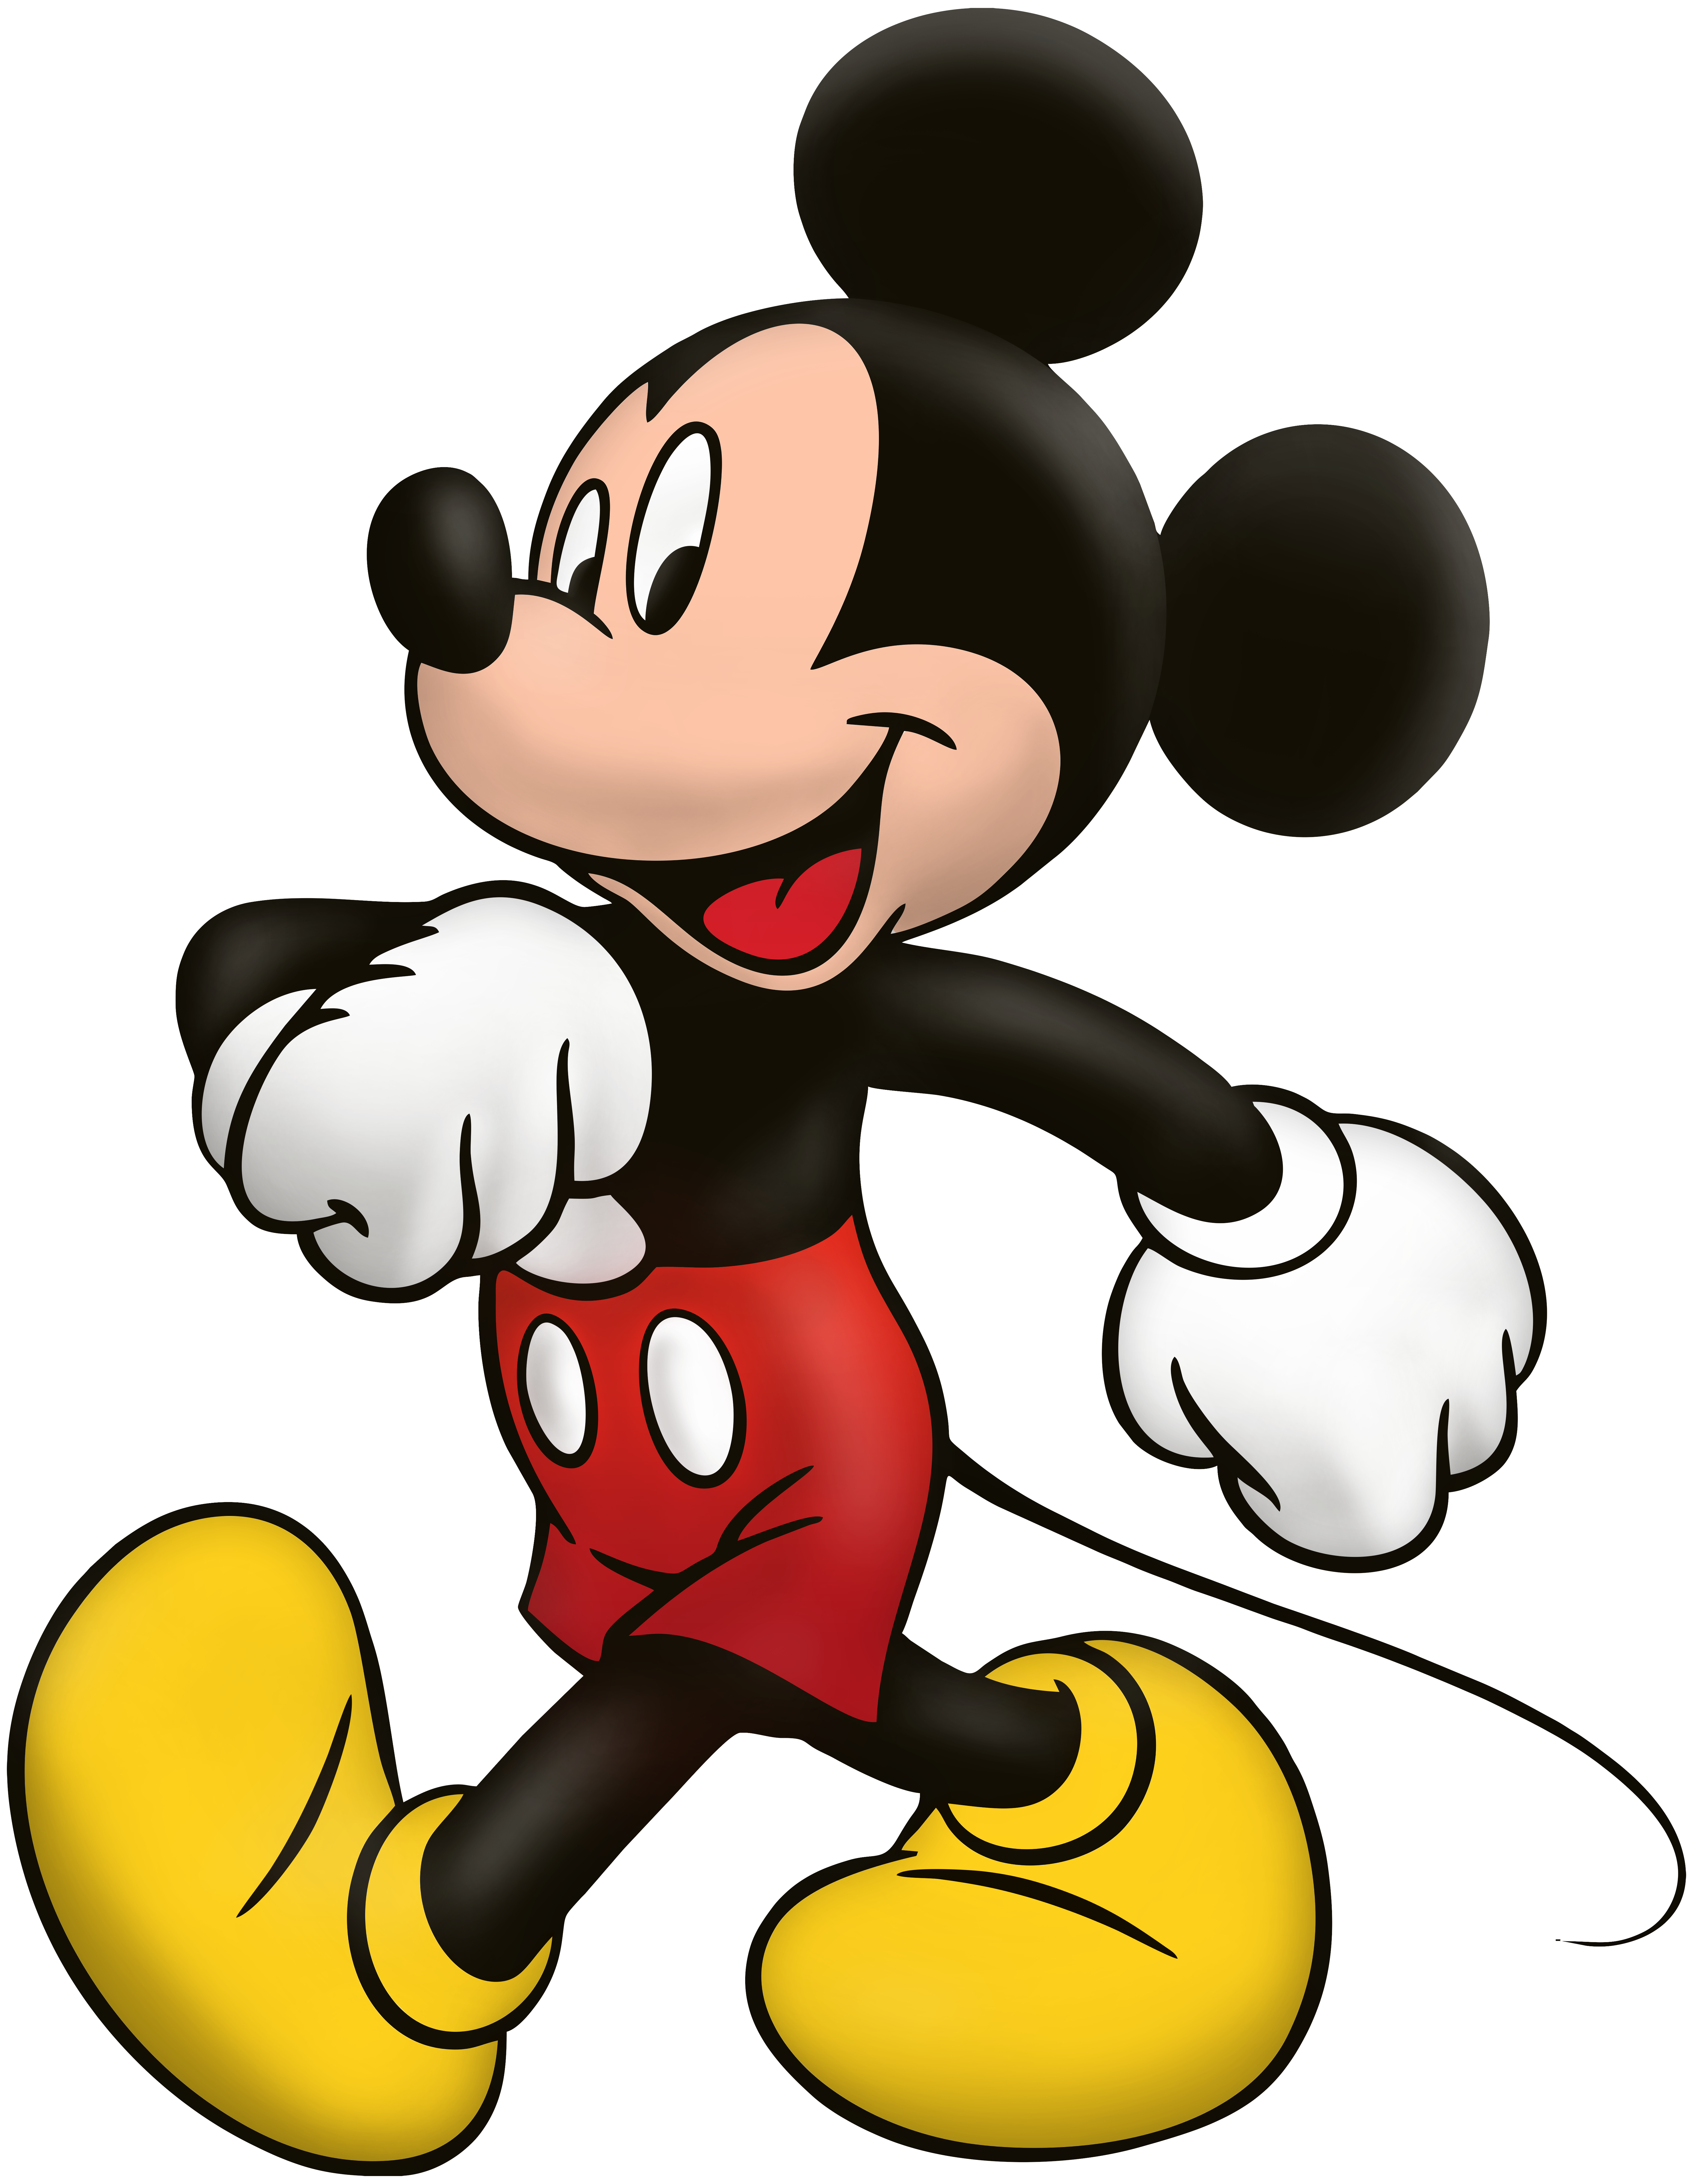 Mickey Mouse Png Cartoon Image Gallery Yopriceville High Quality Images And Transparent Png Free Clipart